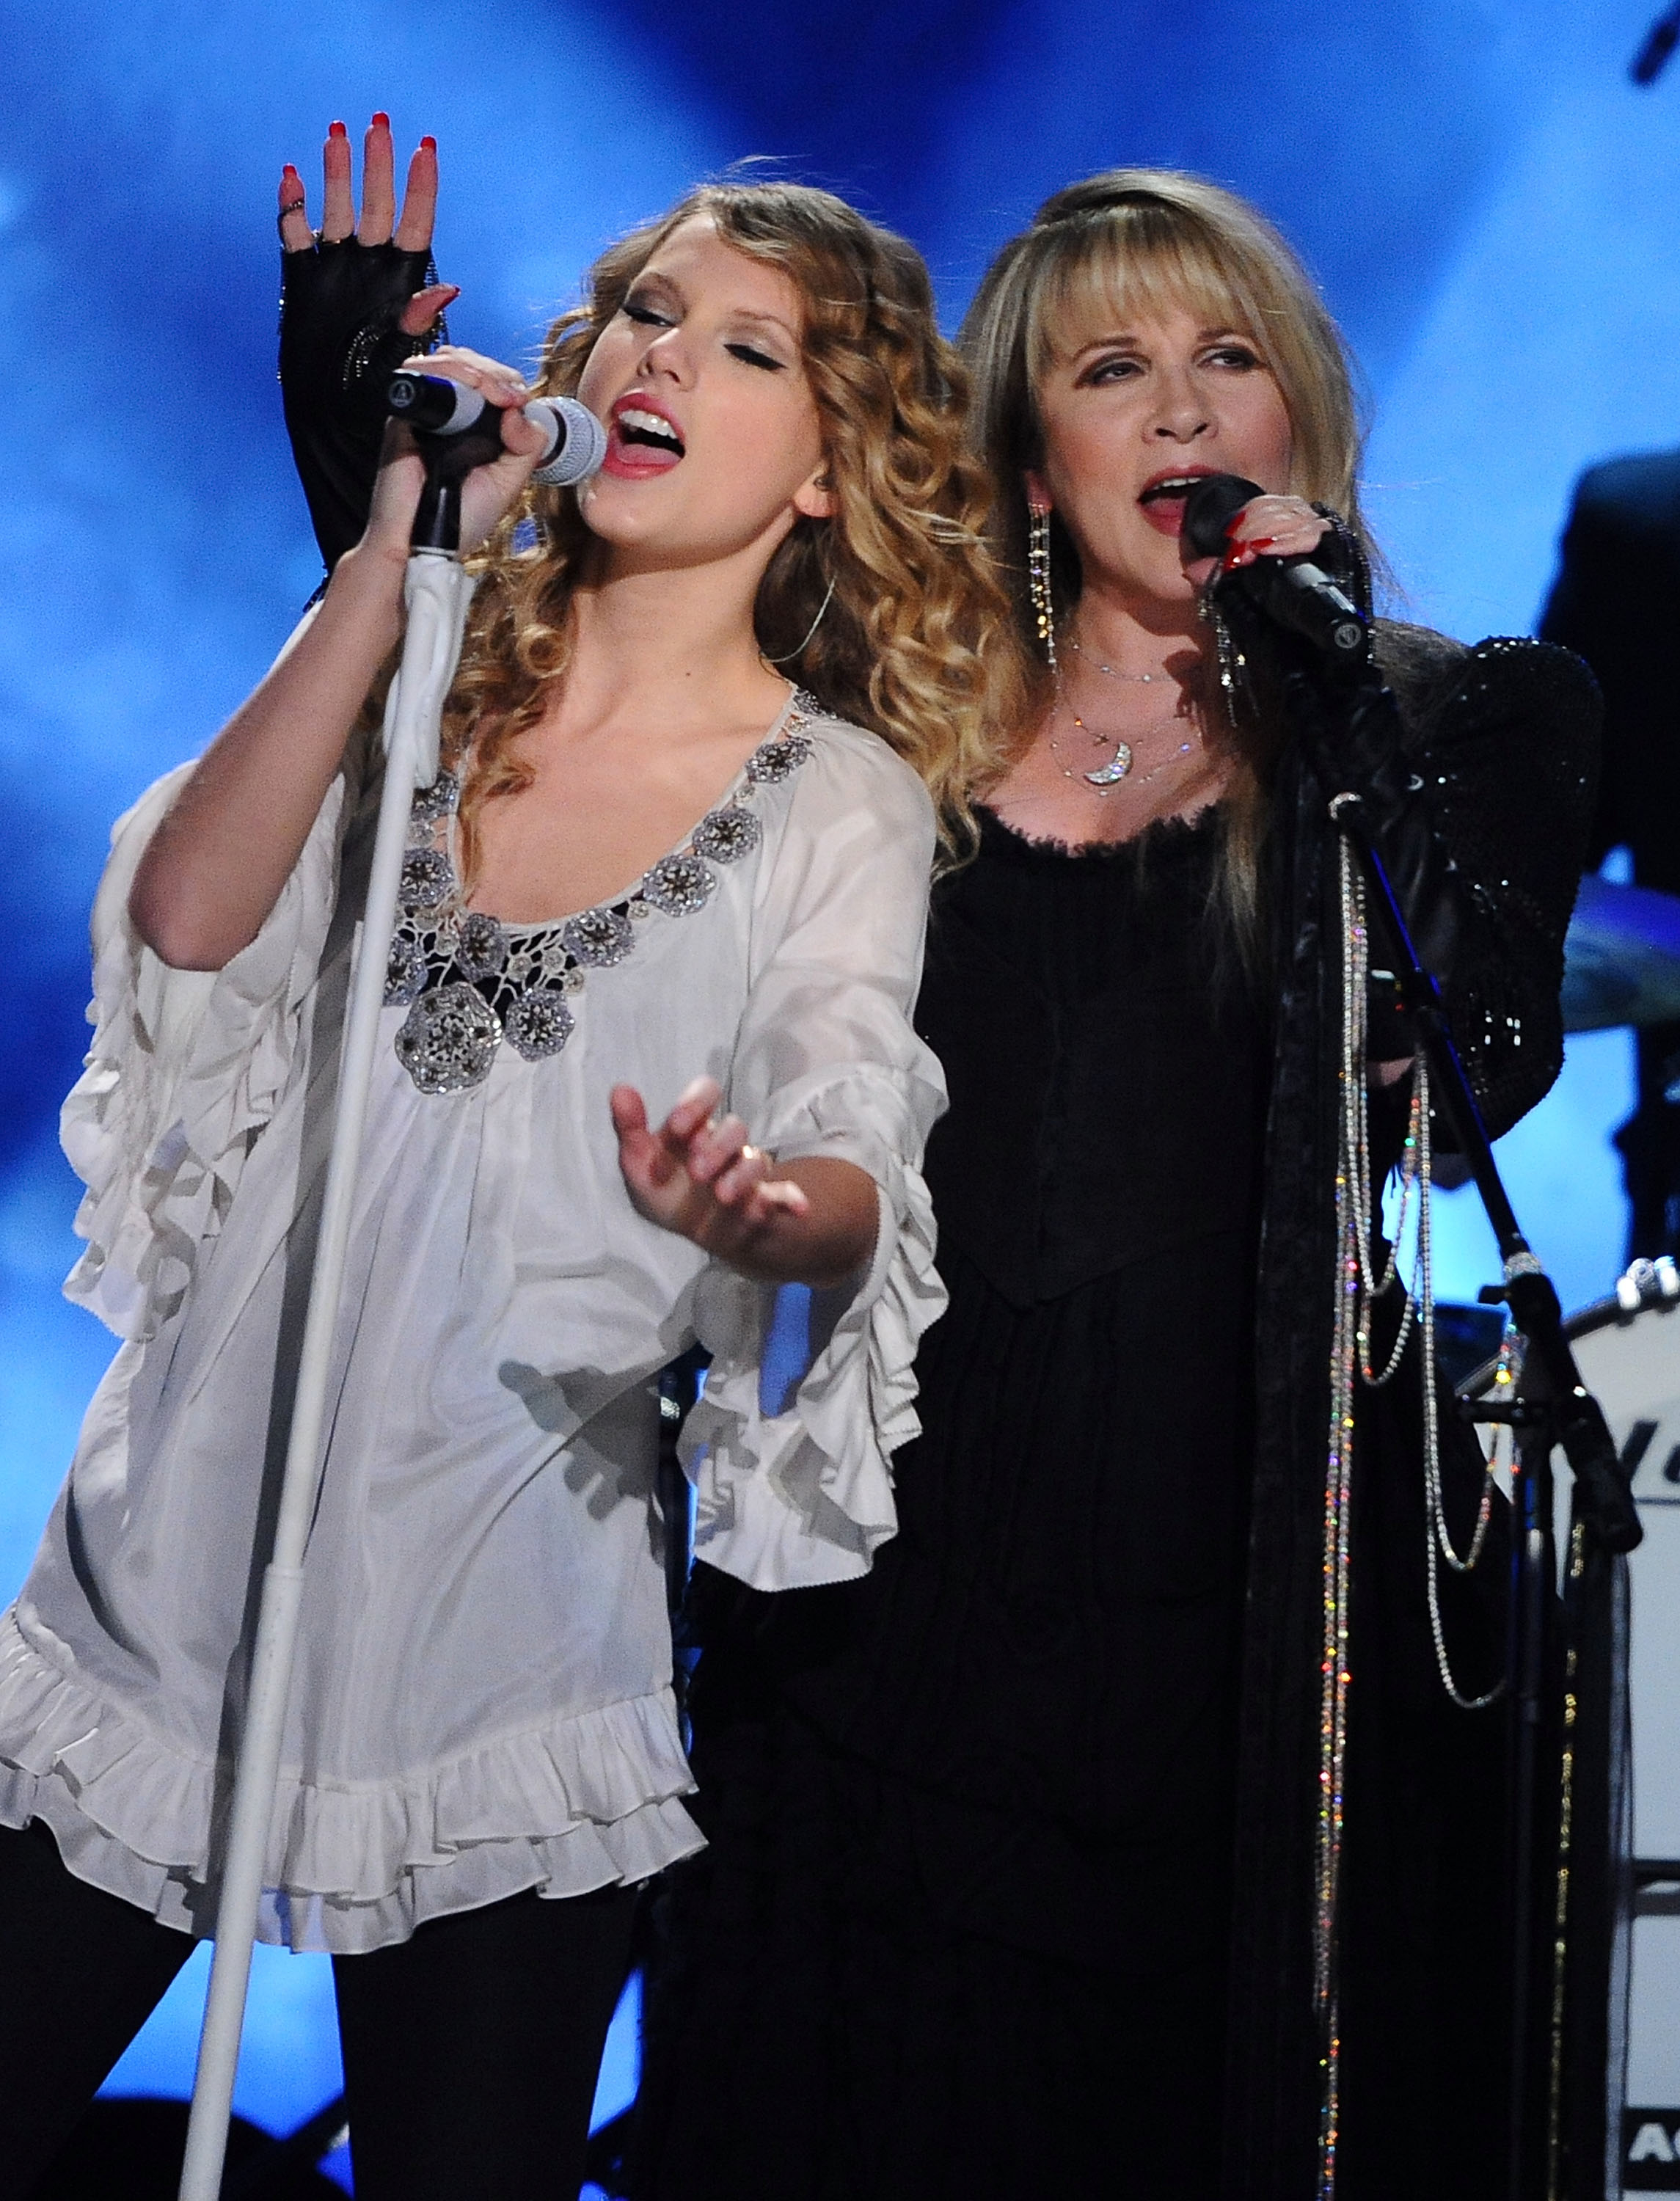 Taylor Swift and Stevie Nicks performing together